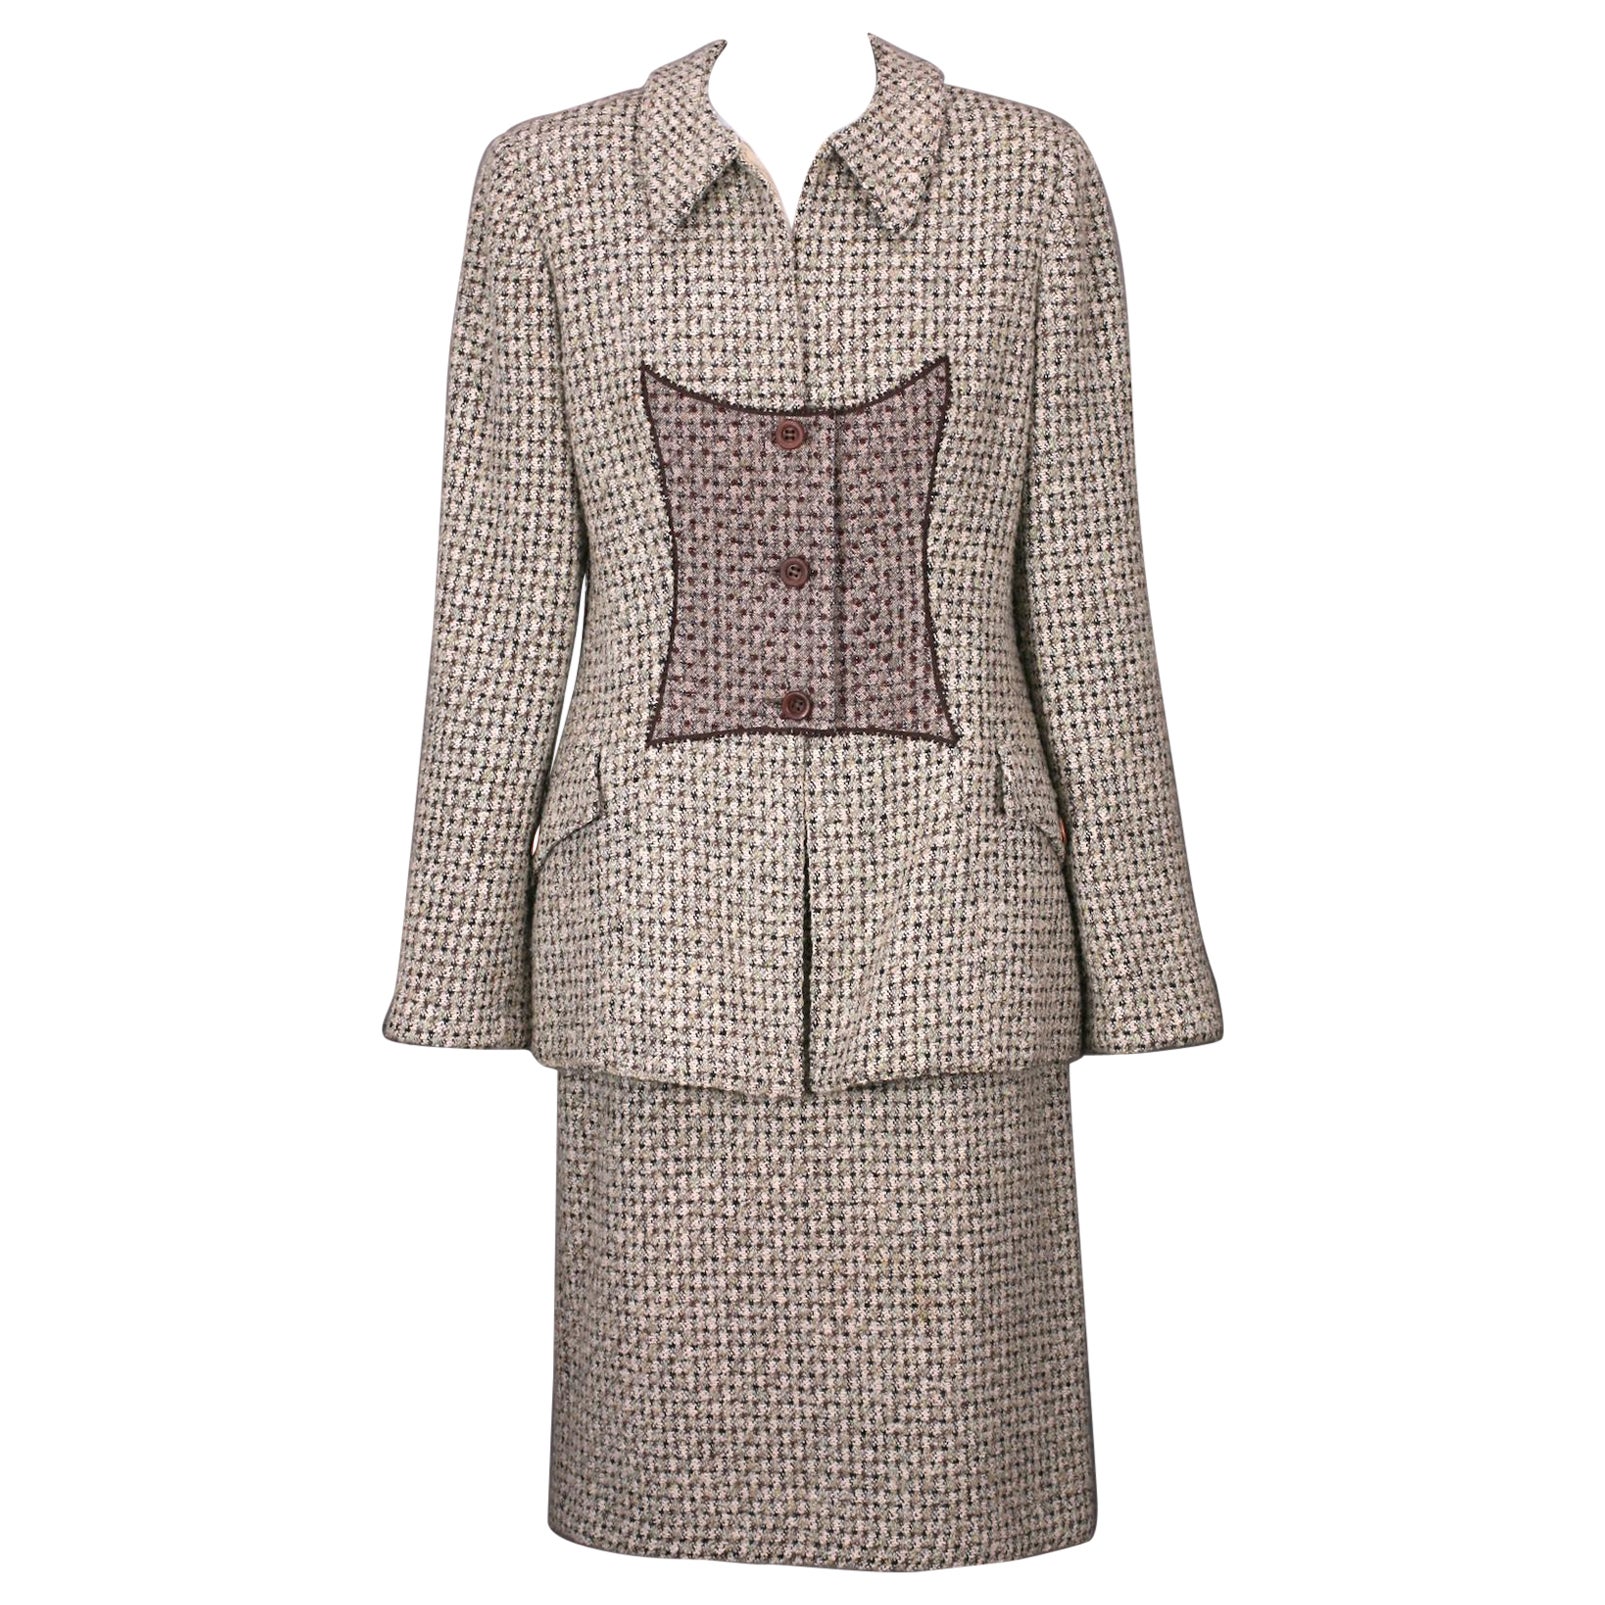 Geoffrey Beene Tweed and Tulle Suit For Sale